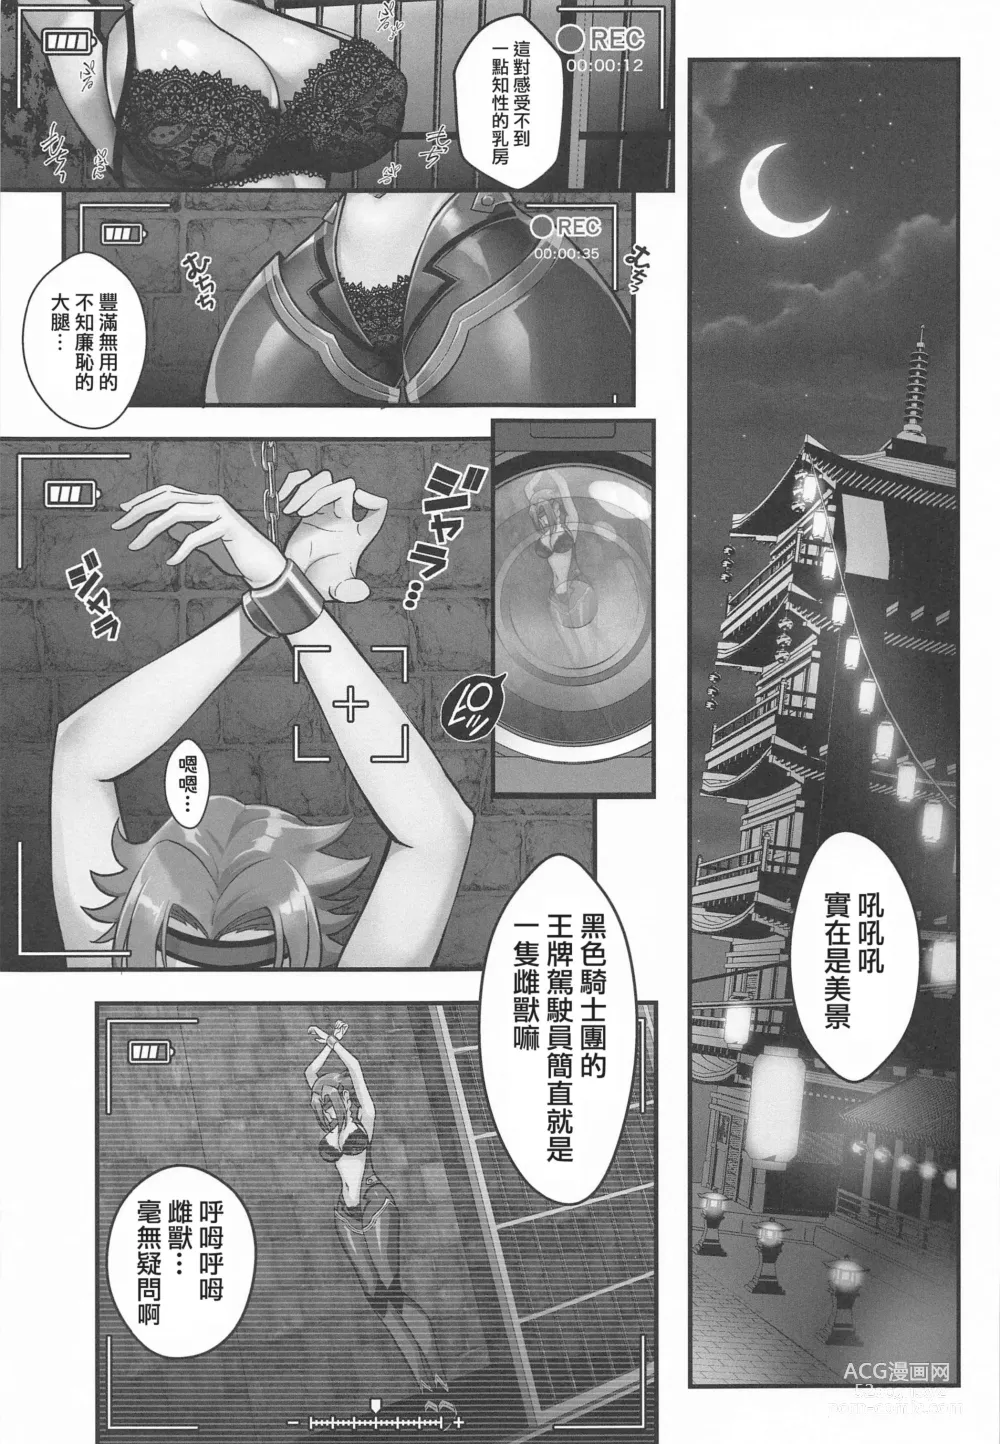 Page 6 of doujinshi Ace of Captive